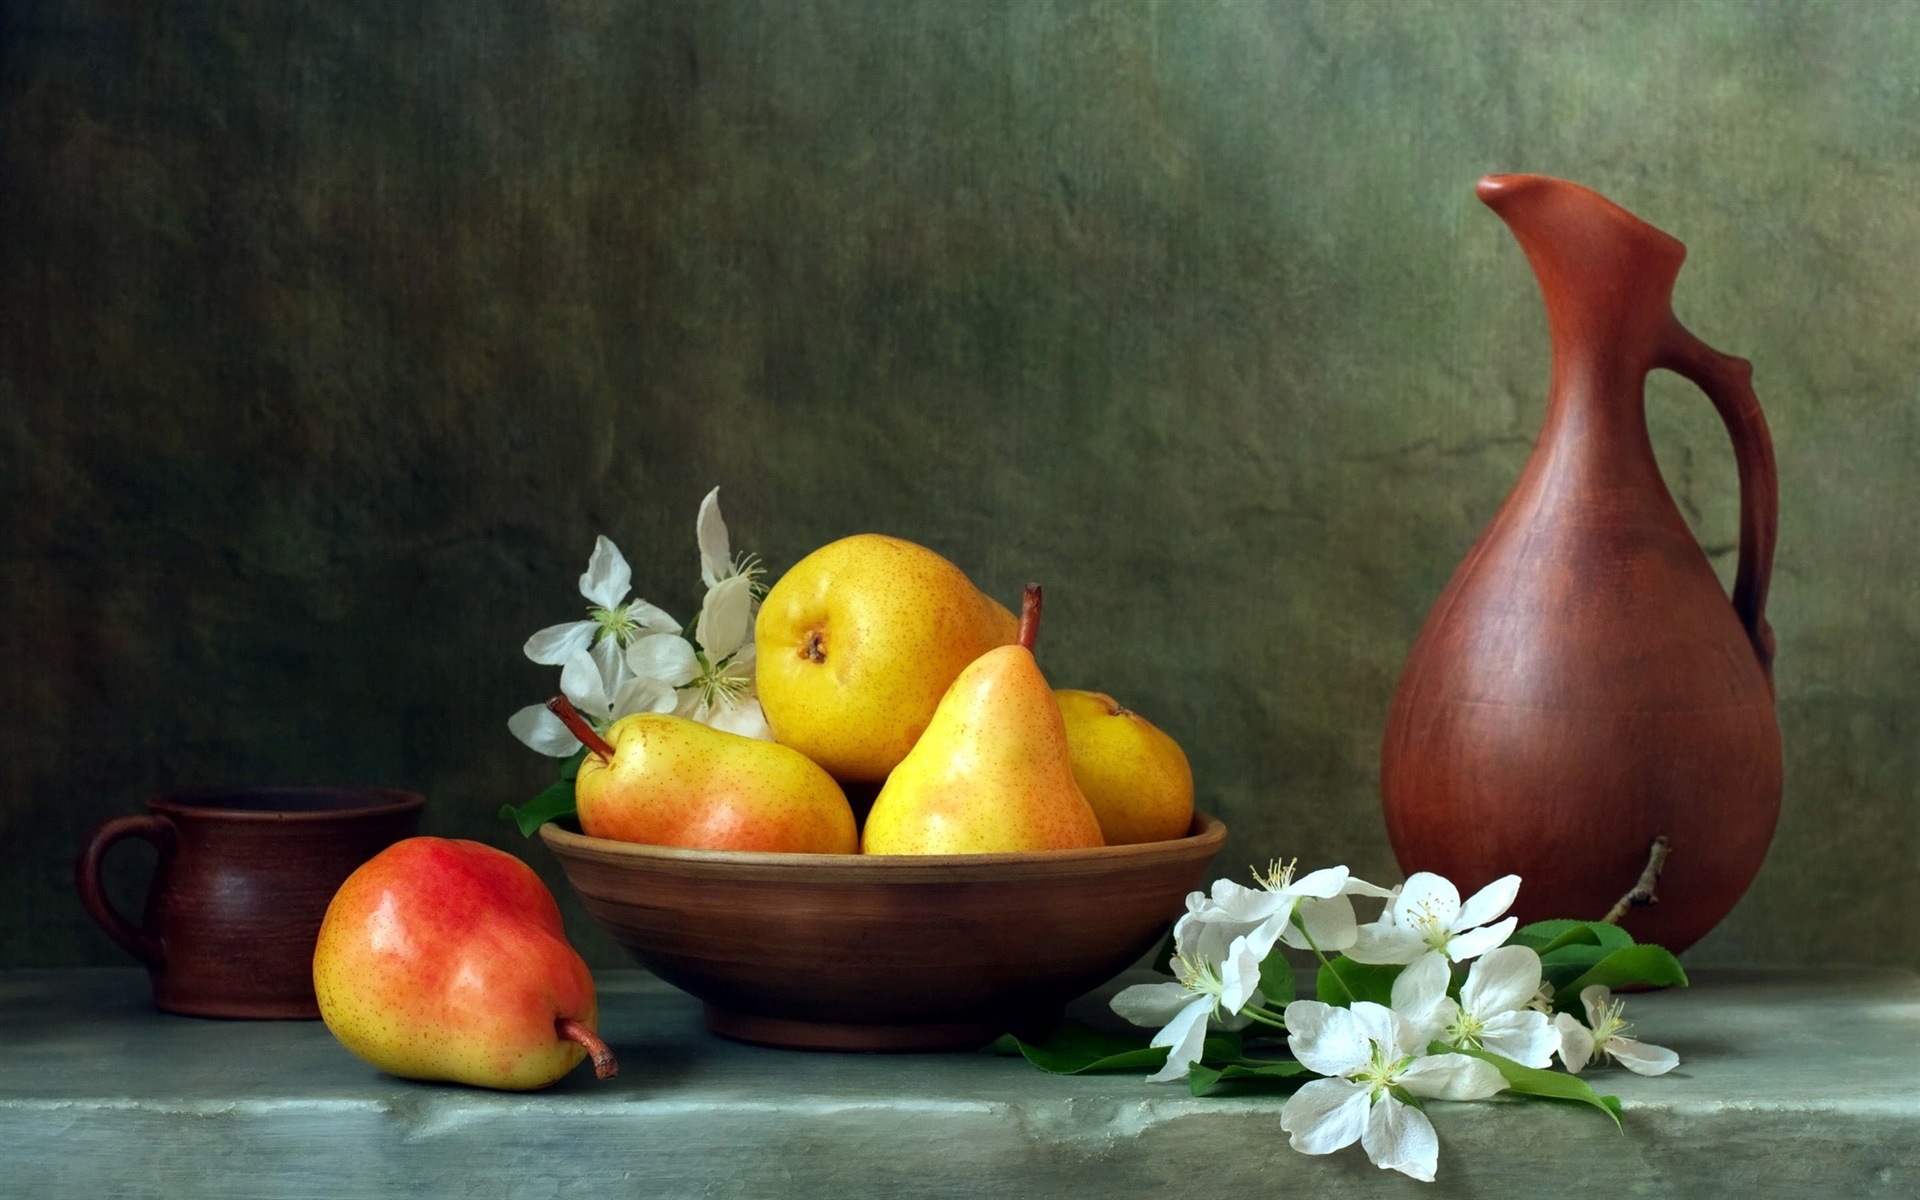 photography, still life, bowl, cup, flower, pear, pitcher